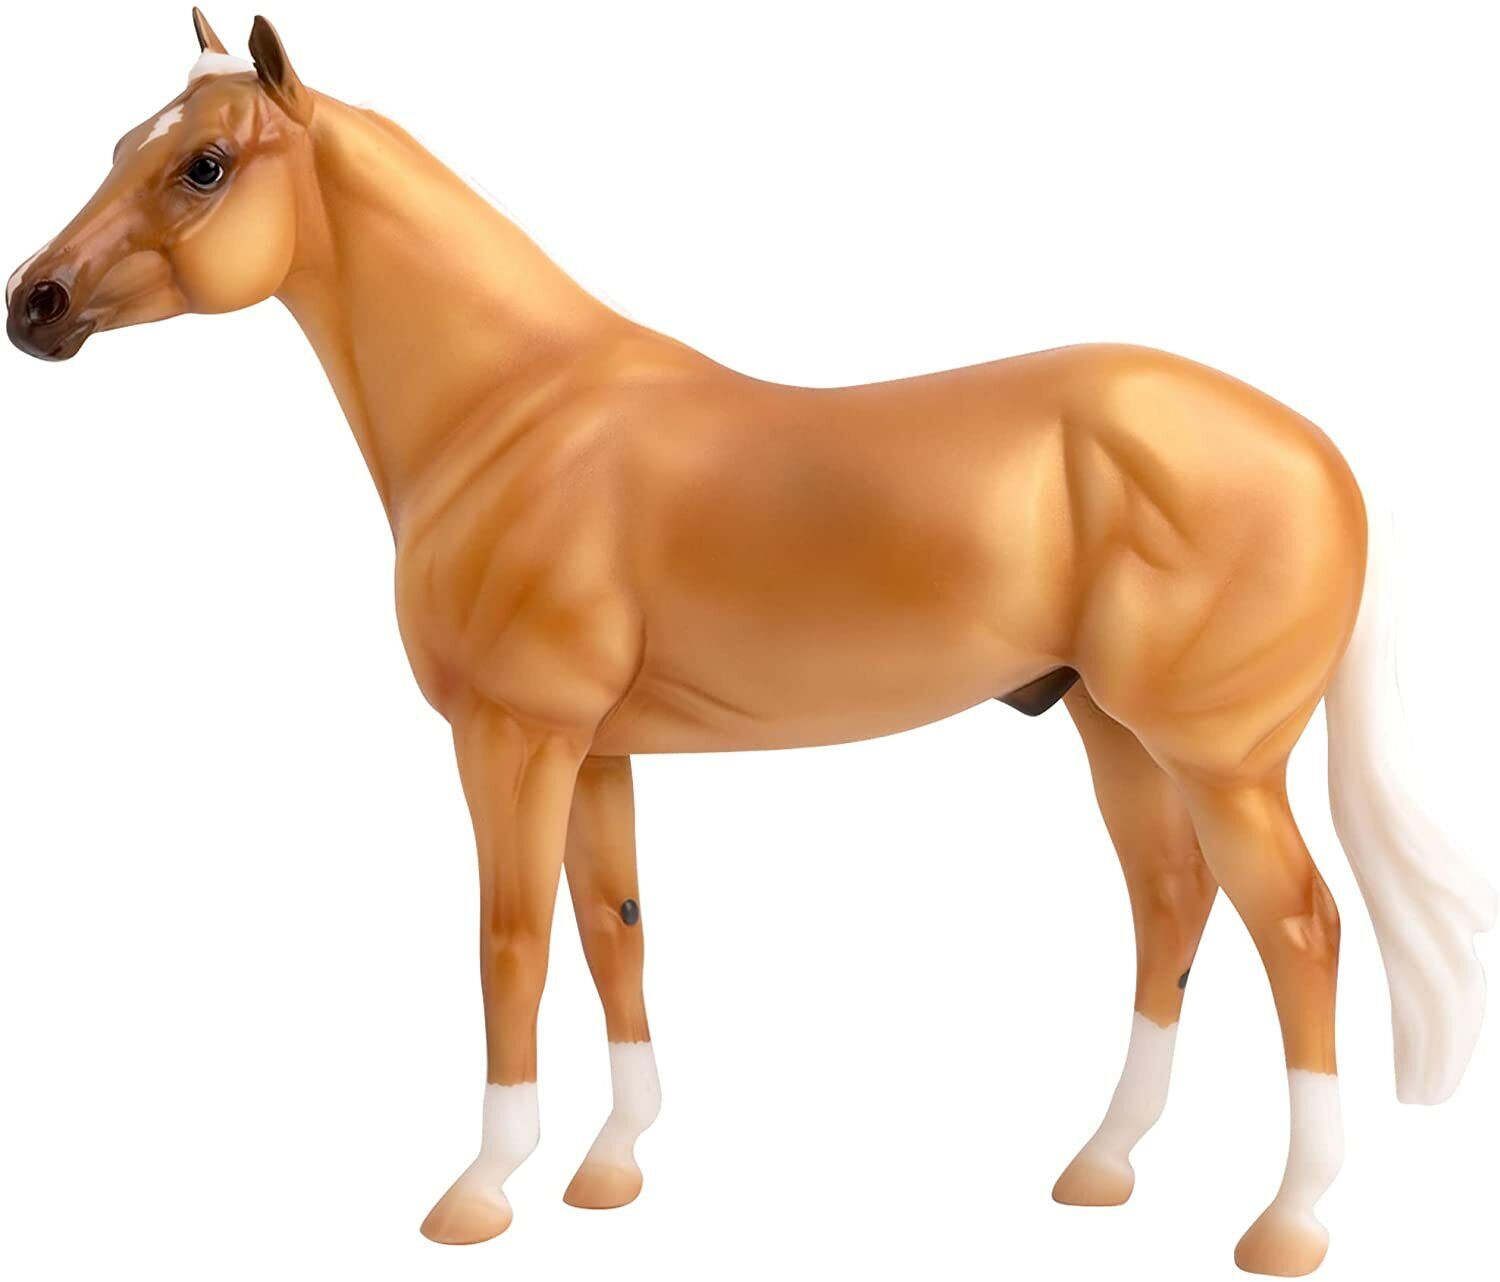 BREYER IDEAL PALOMINO HORSE #1836 THIRD IN SERIES A PEARLY PALOMINO MODEL HORSE